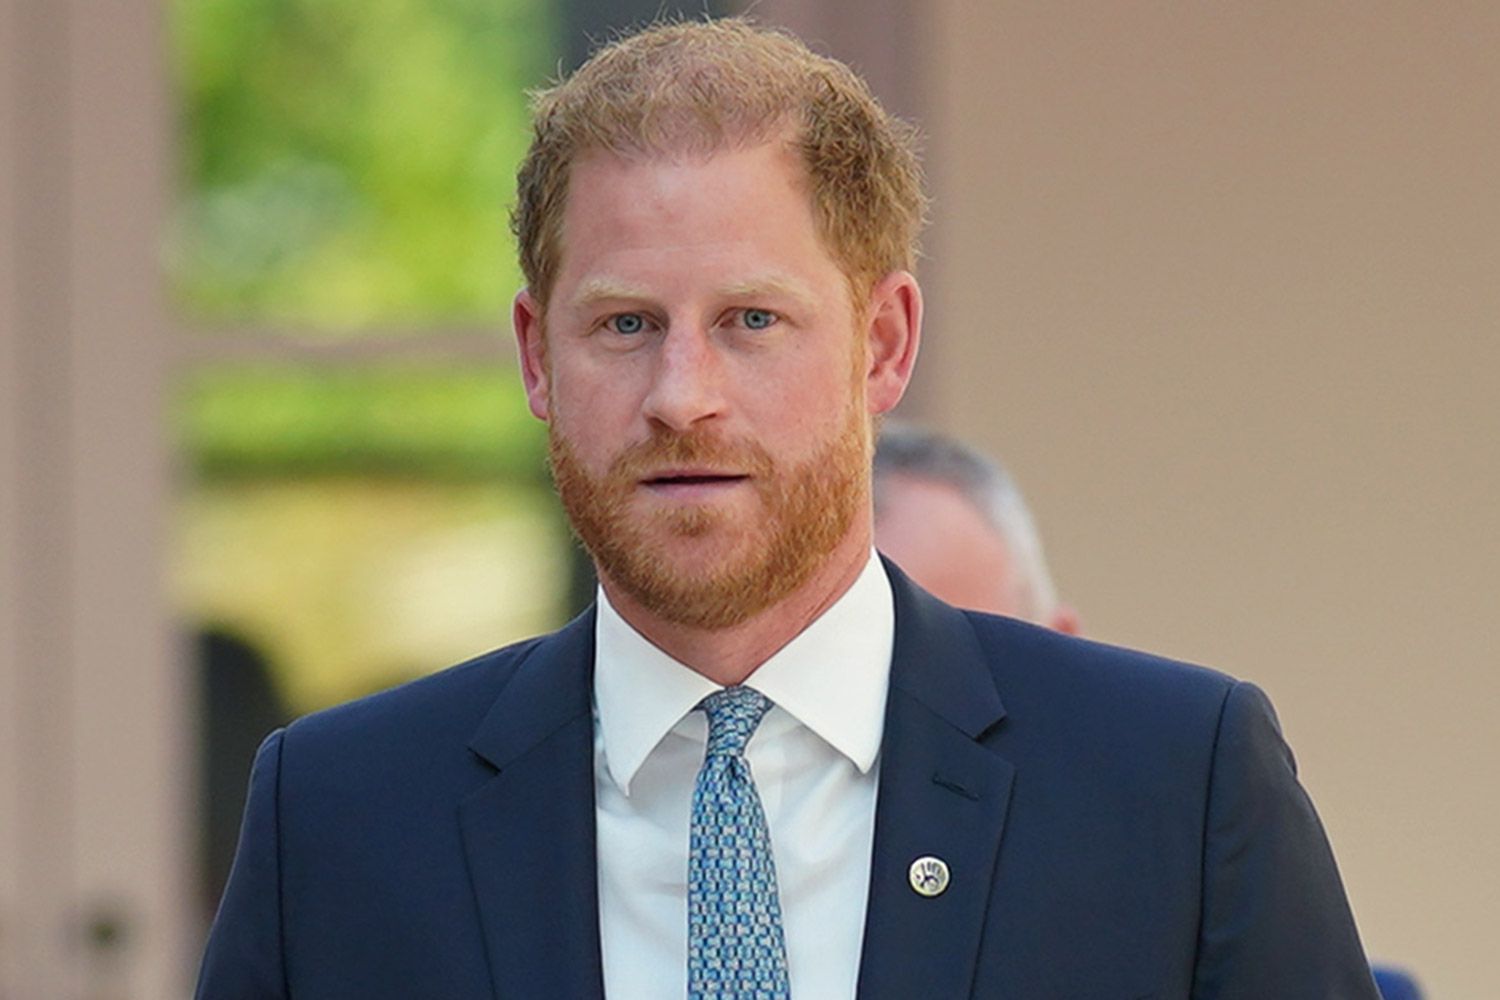 Prince Harry wearing a blue suit